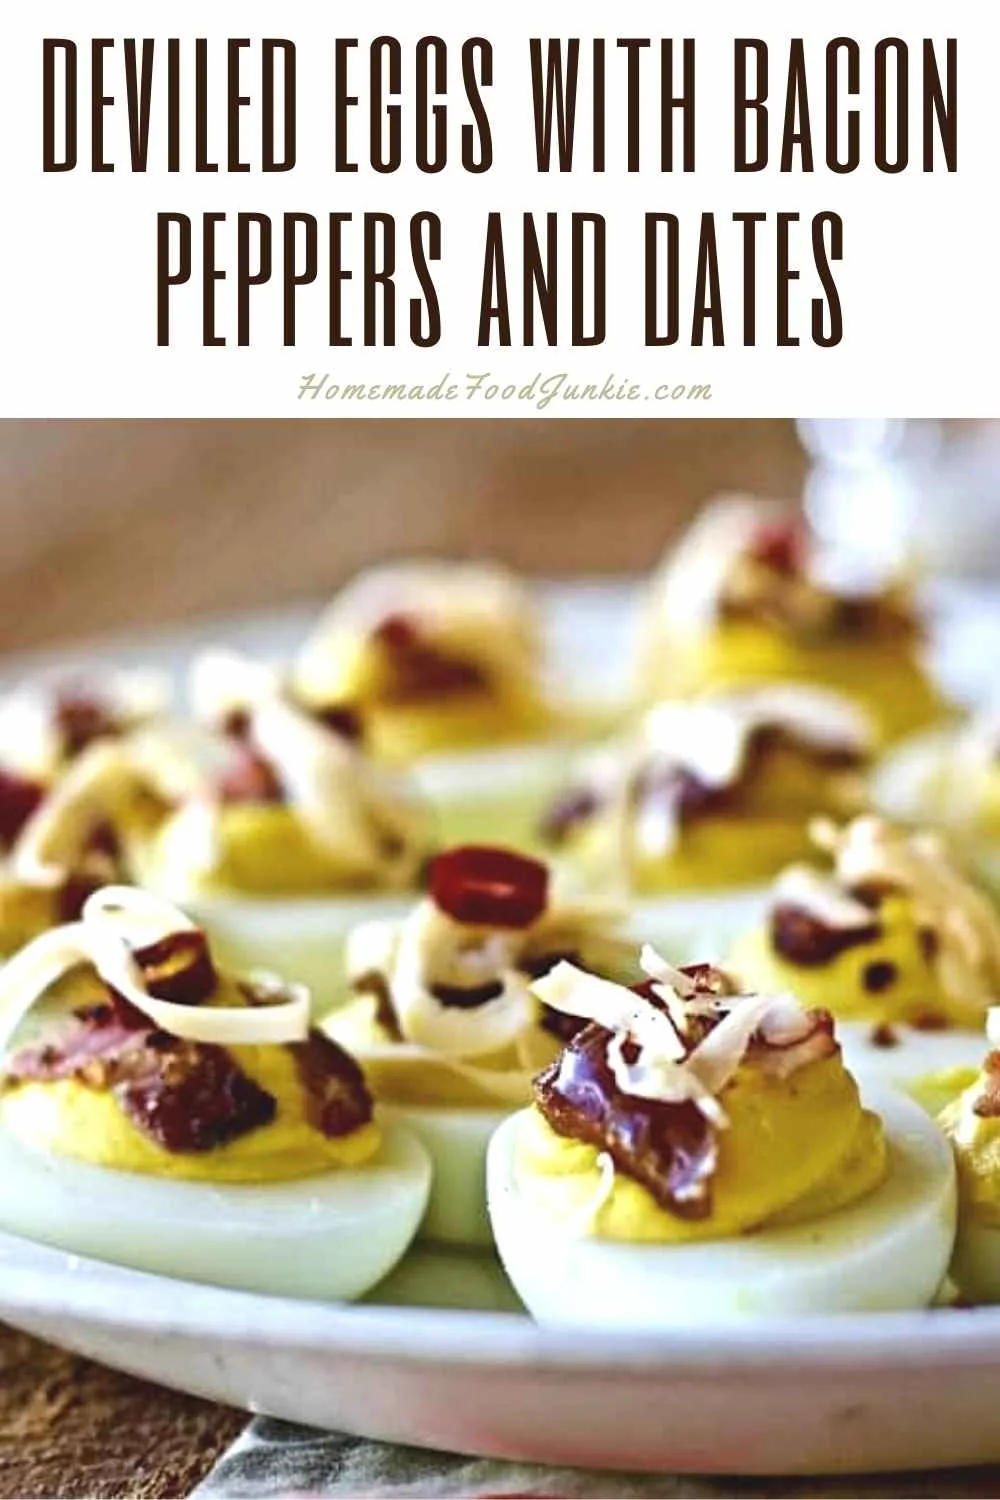 Deviled Eggs With Bacon Peppers And Dates-Pin Image